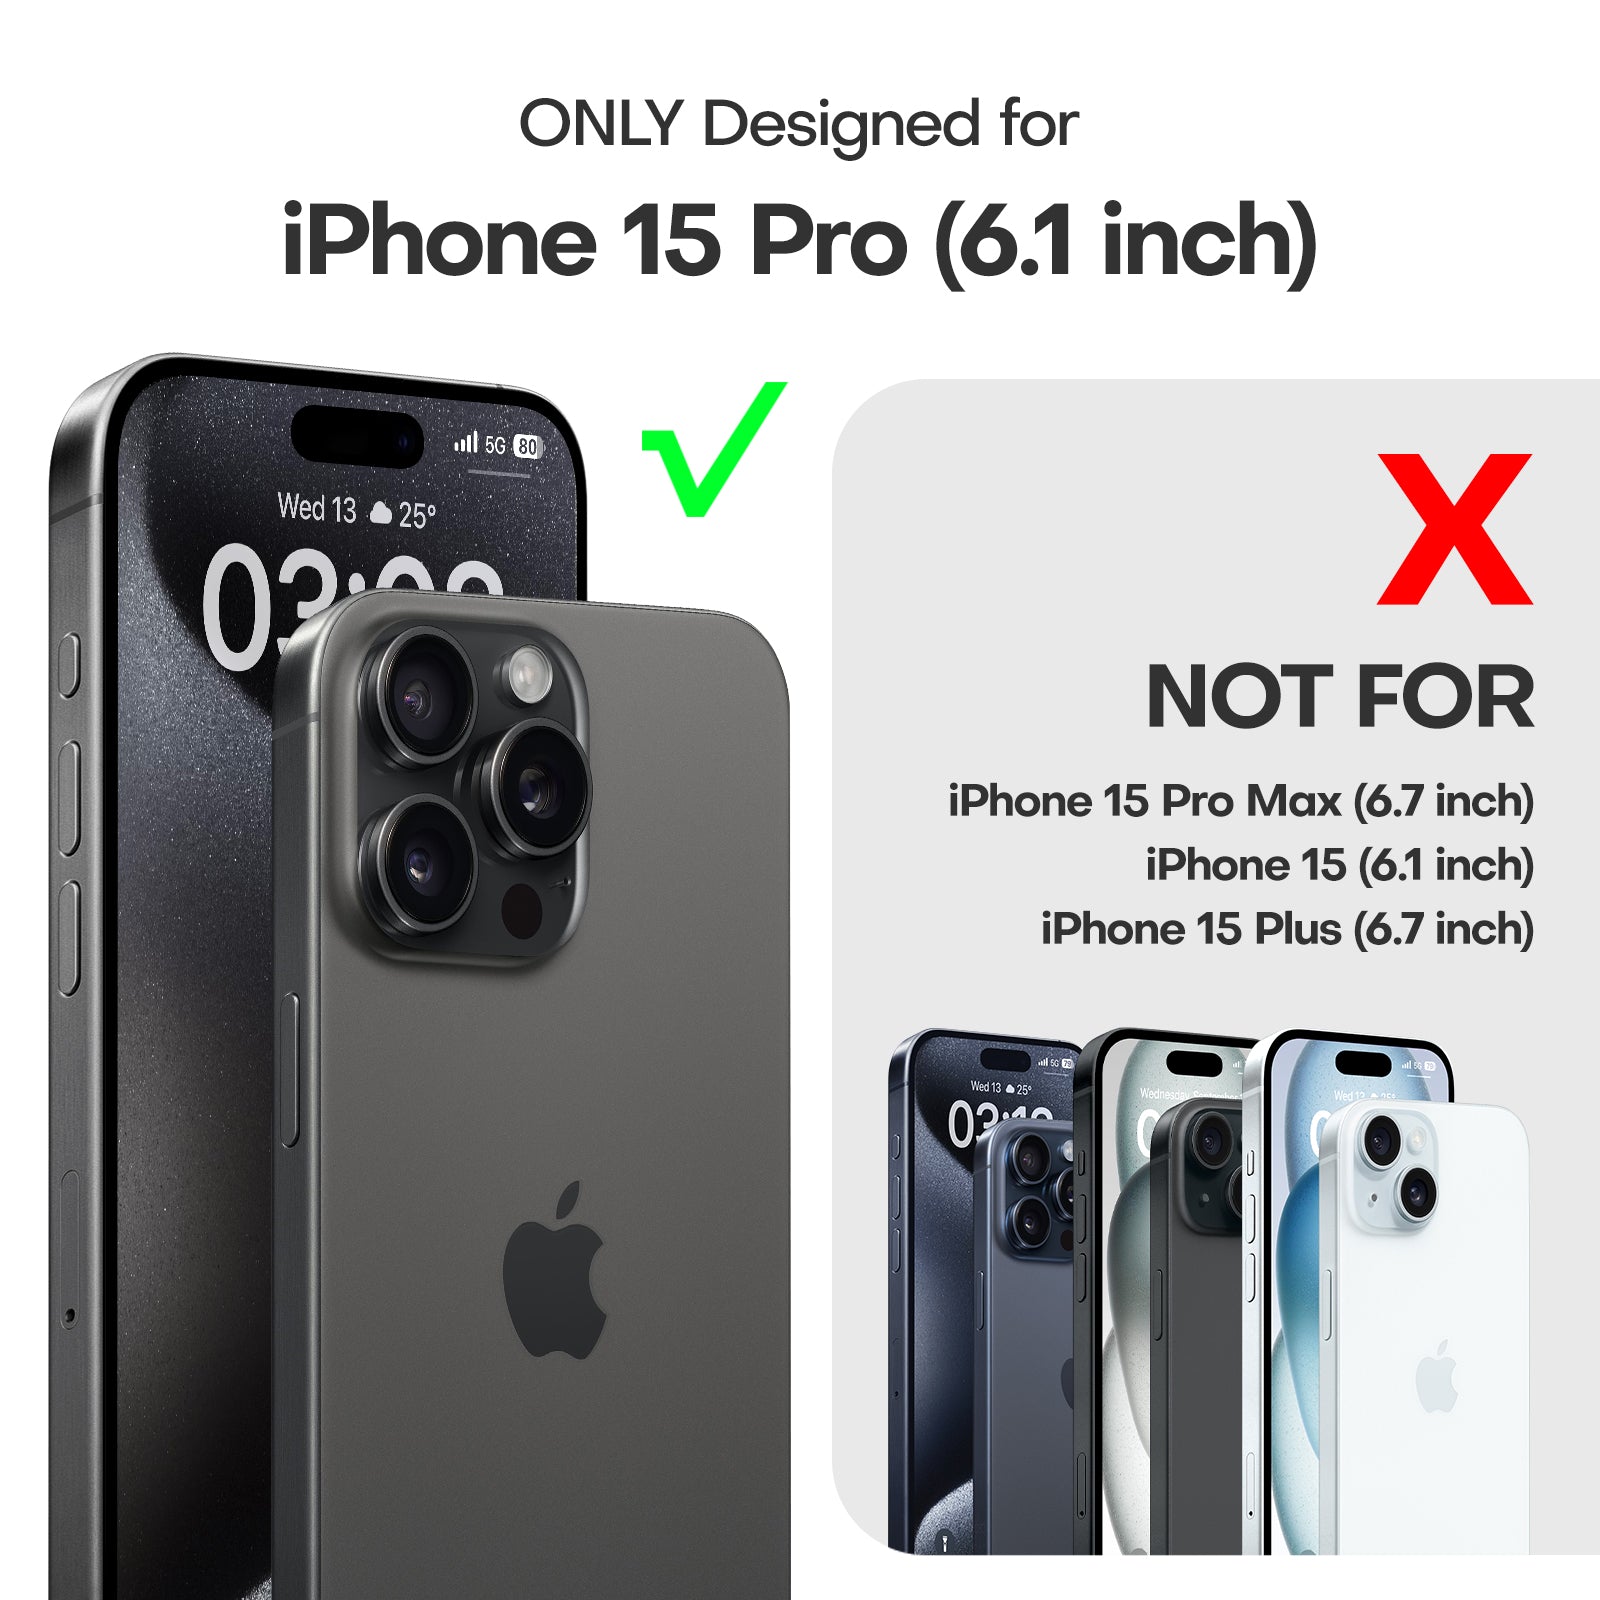 TAURI 5-in-1 for iPhone 15 Pro Case MatteBlack, Translucent Matte Case with 2X Screen Protector +2X Camera Lens Protector, [Military Grade Protection] Shockproof Slim Case for iPhone 15 Pro, 6.1"